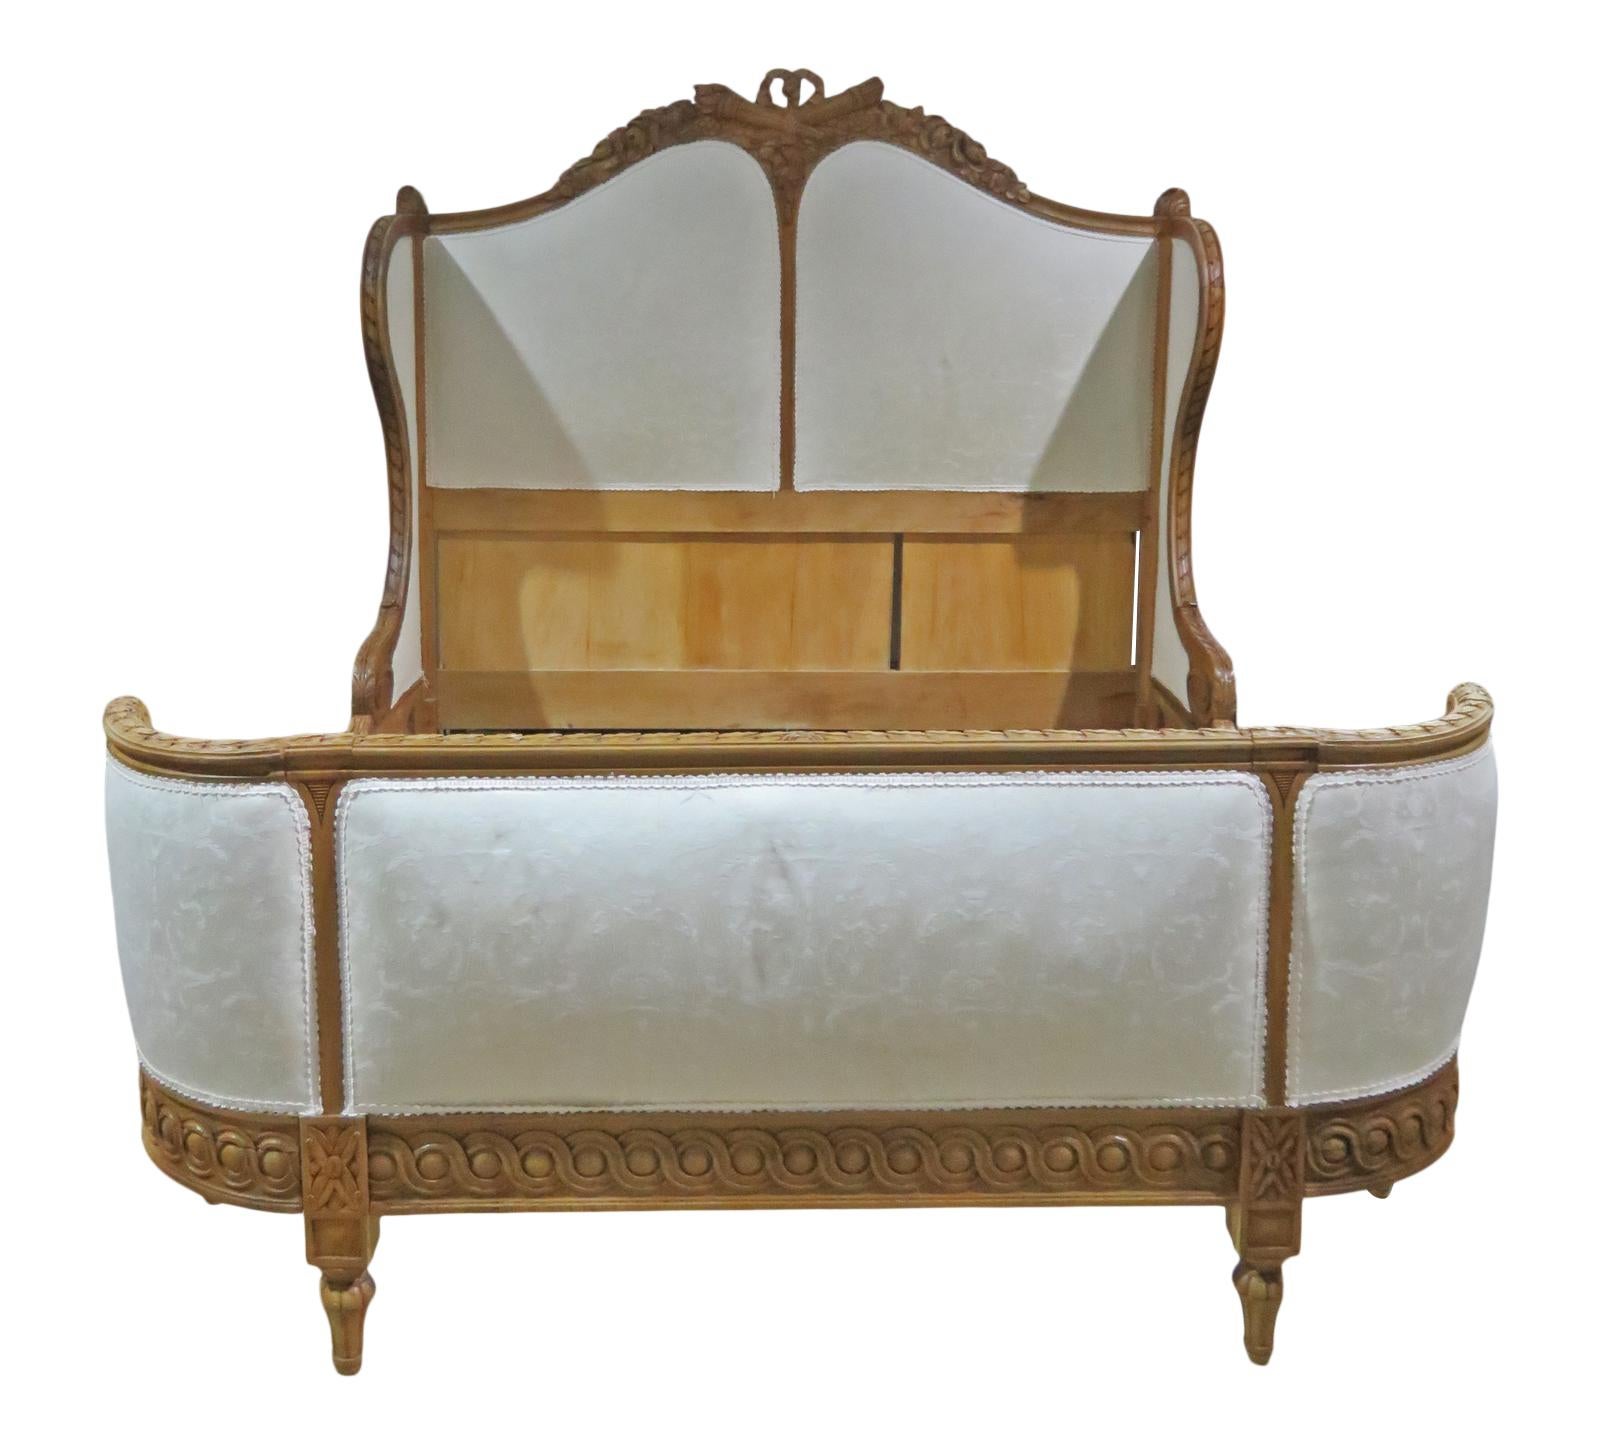 Carved wood frame. Upholstered headboard and footboard. With rails. Measures: 62 3/4